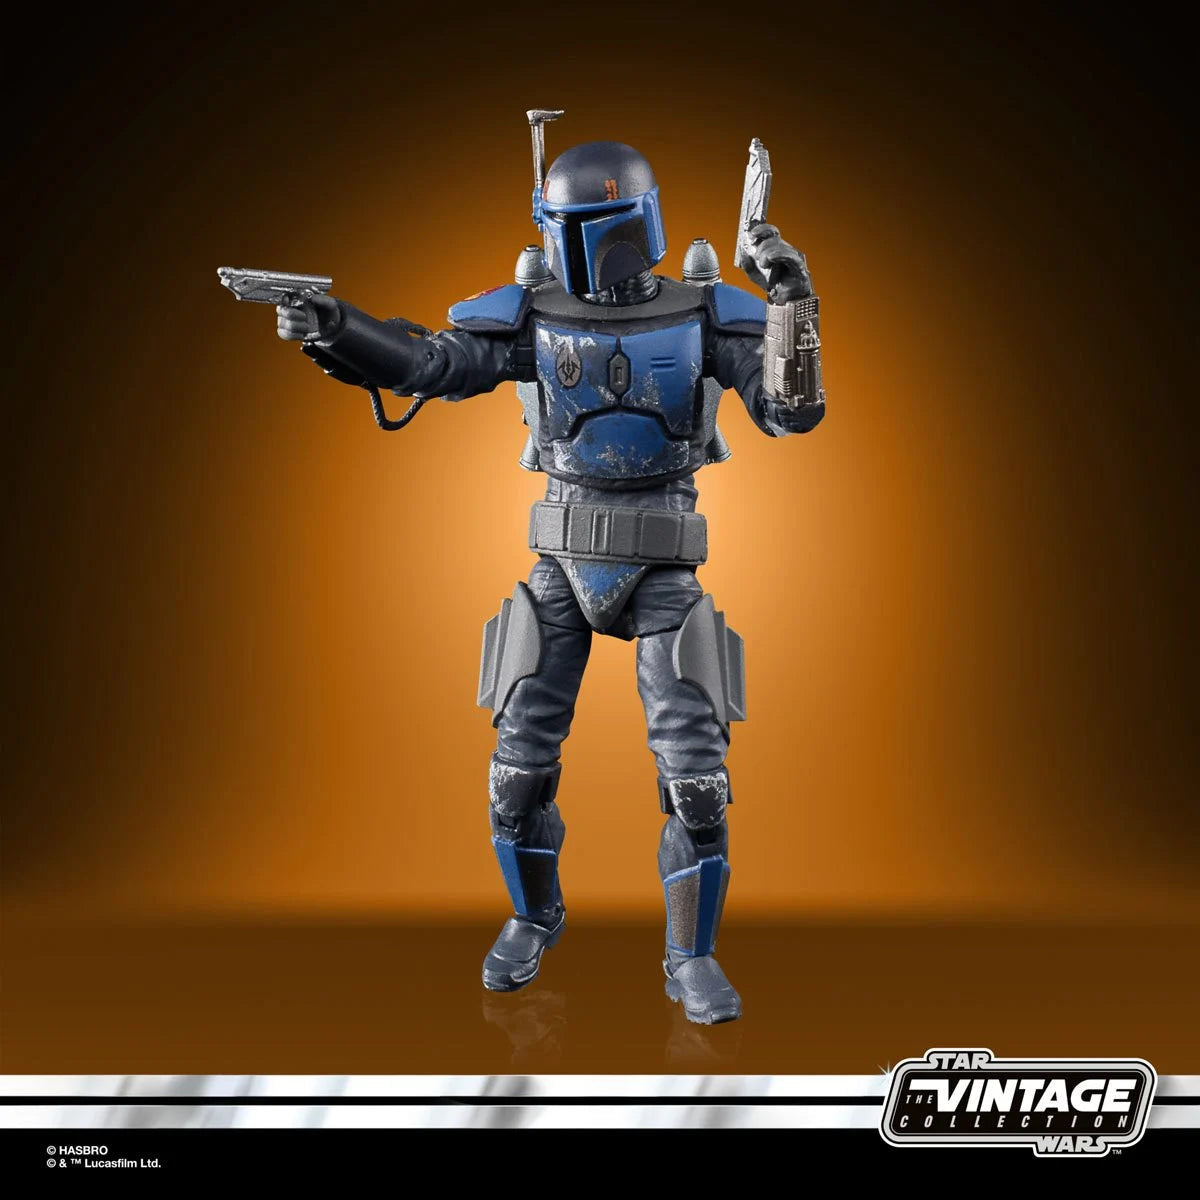 Star Wars: The Vintage Collection Mandalorian Death Watch Airborne Trooper Hasbro